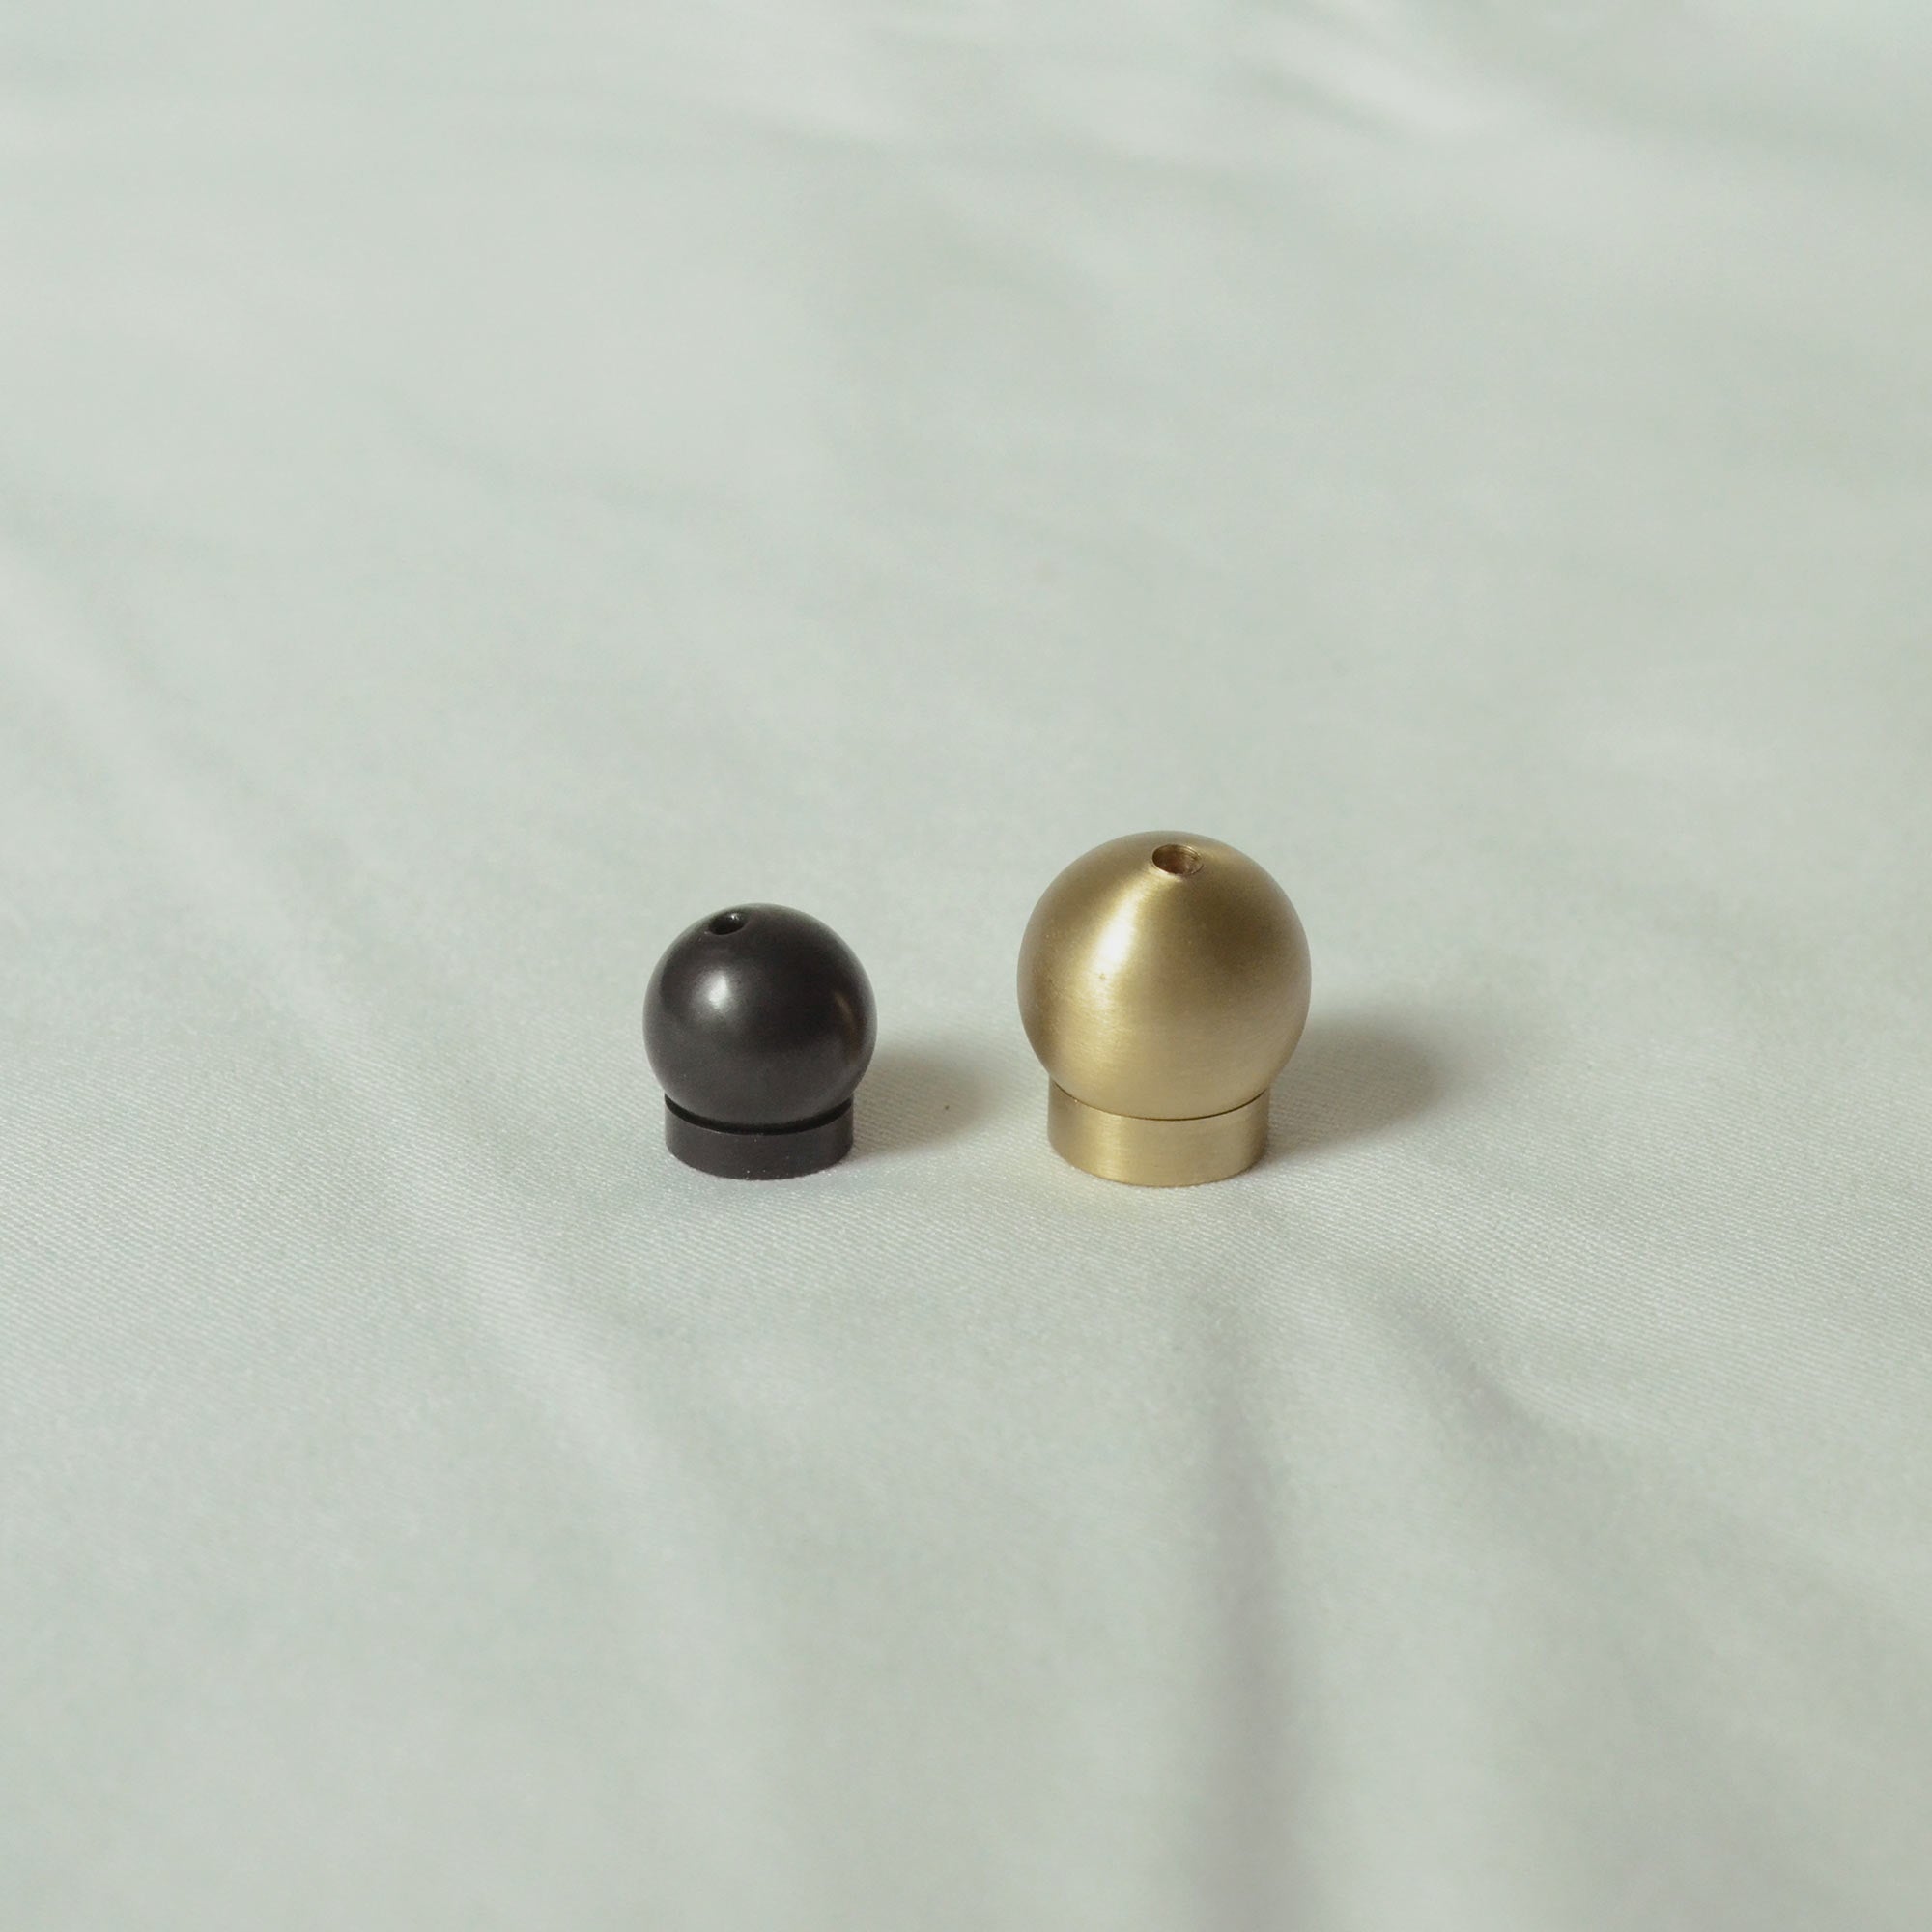 difference in size of the sphere brass incense holders